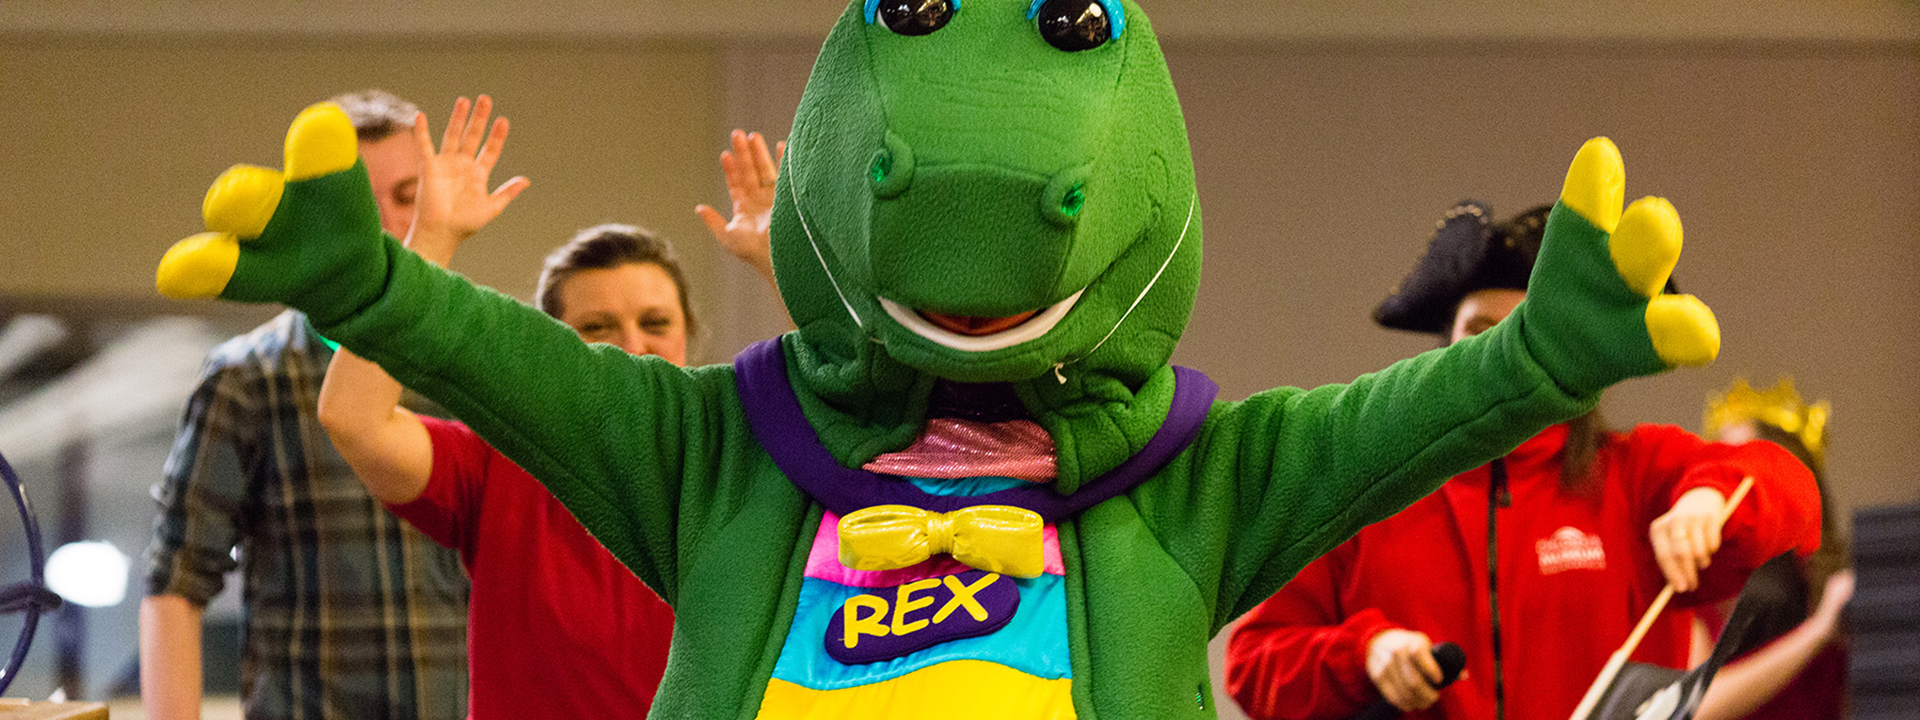 Rex leading the End of Day Parade at The Children's Museum of Indianapolis